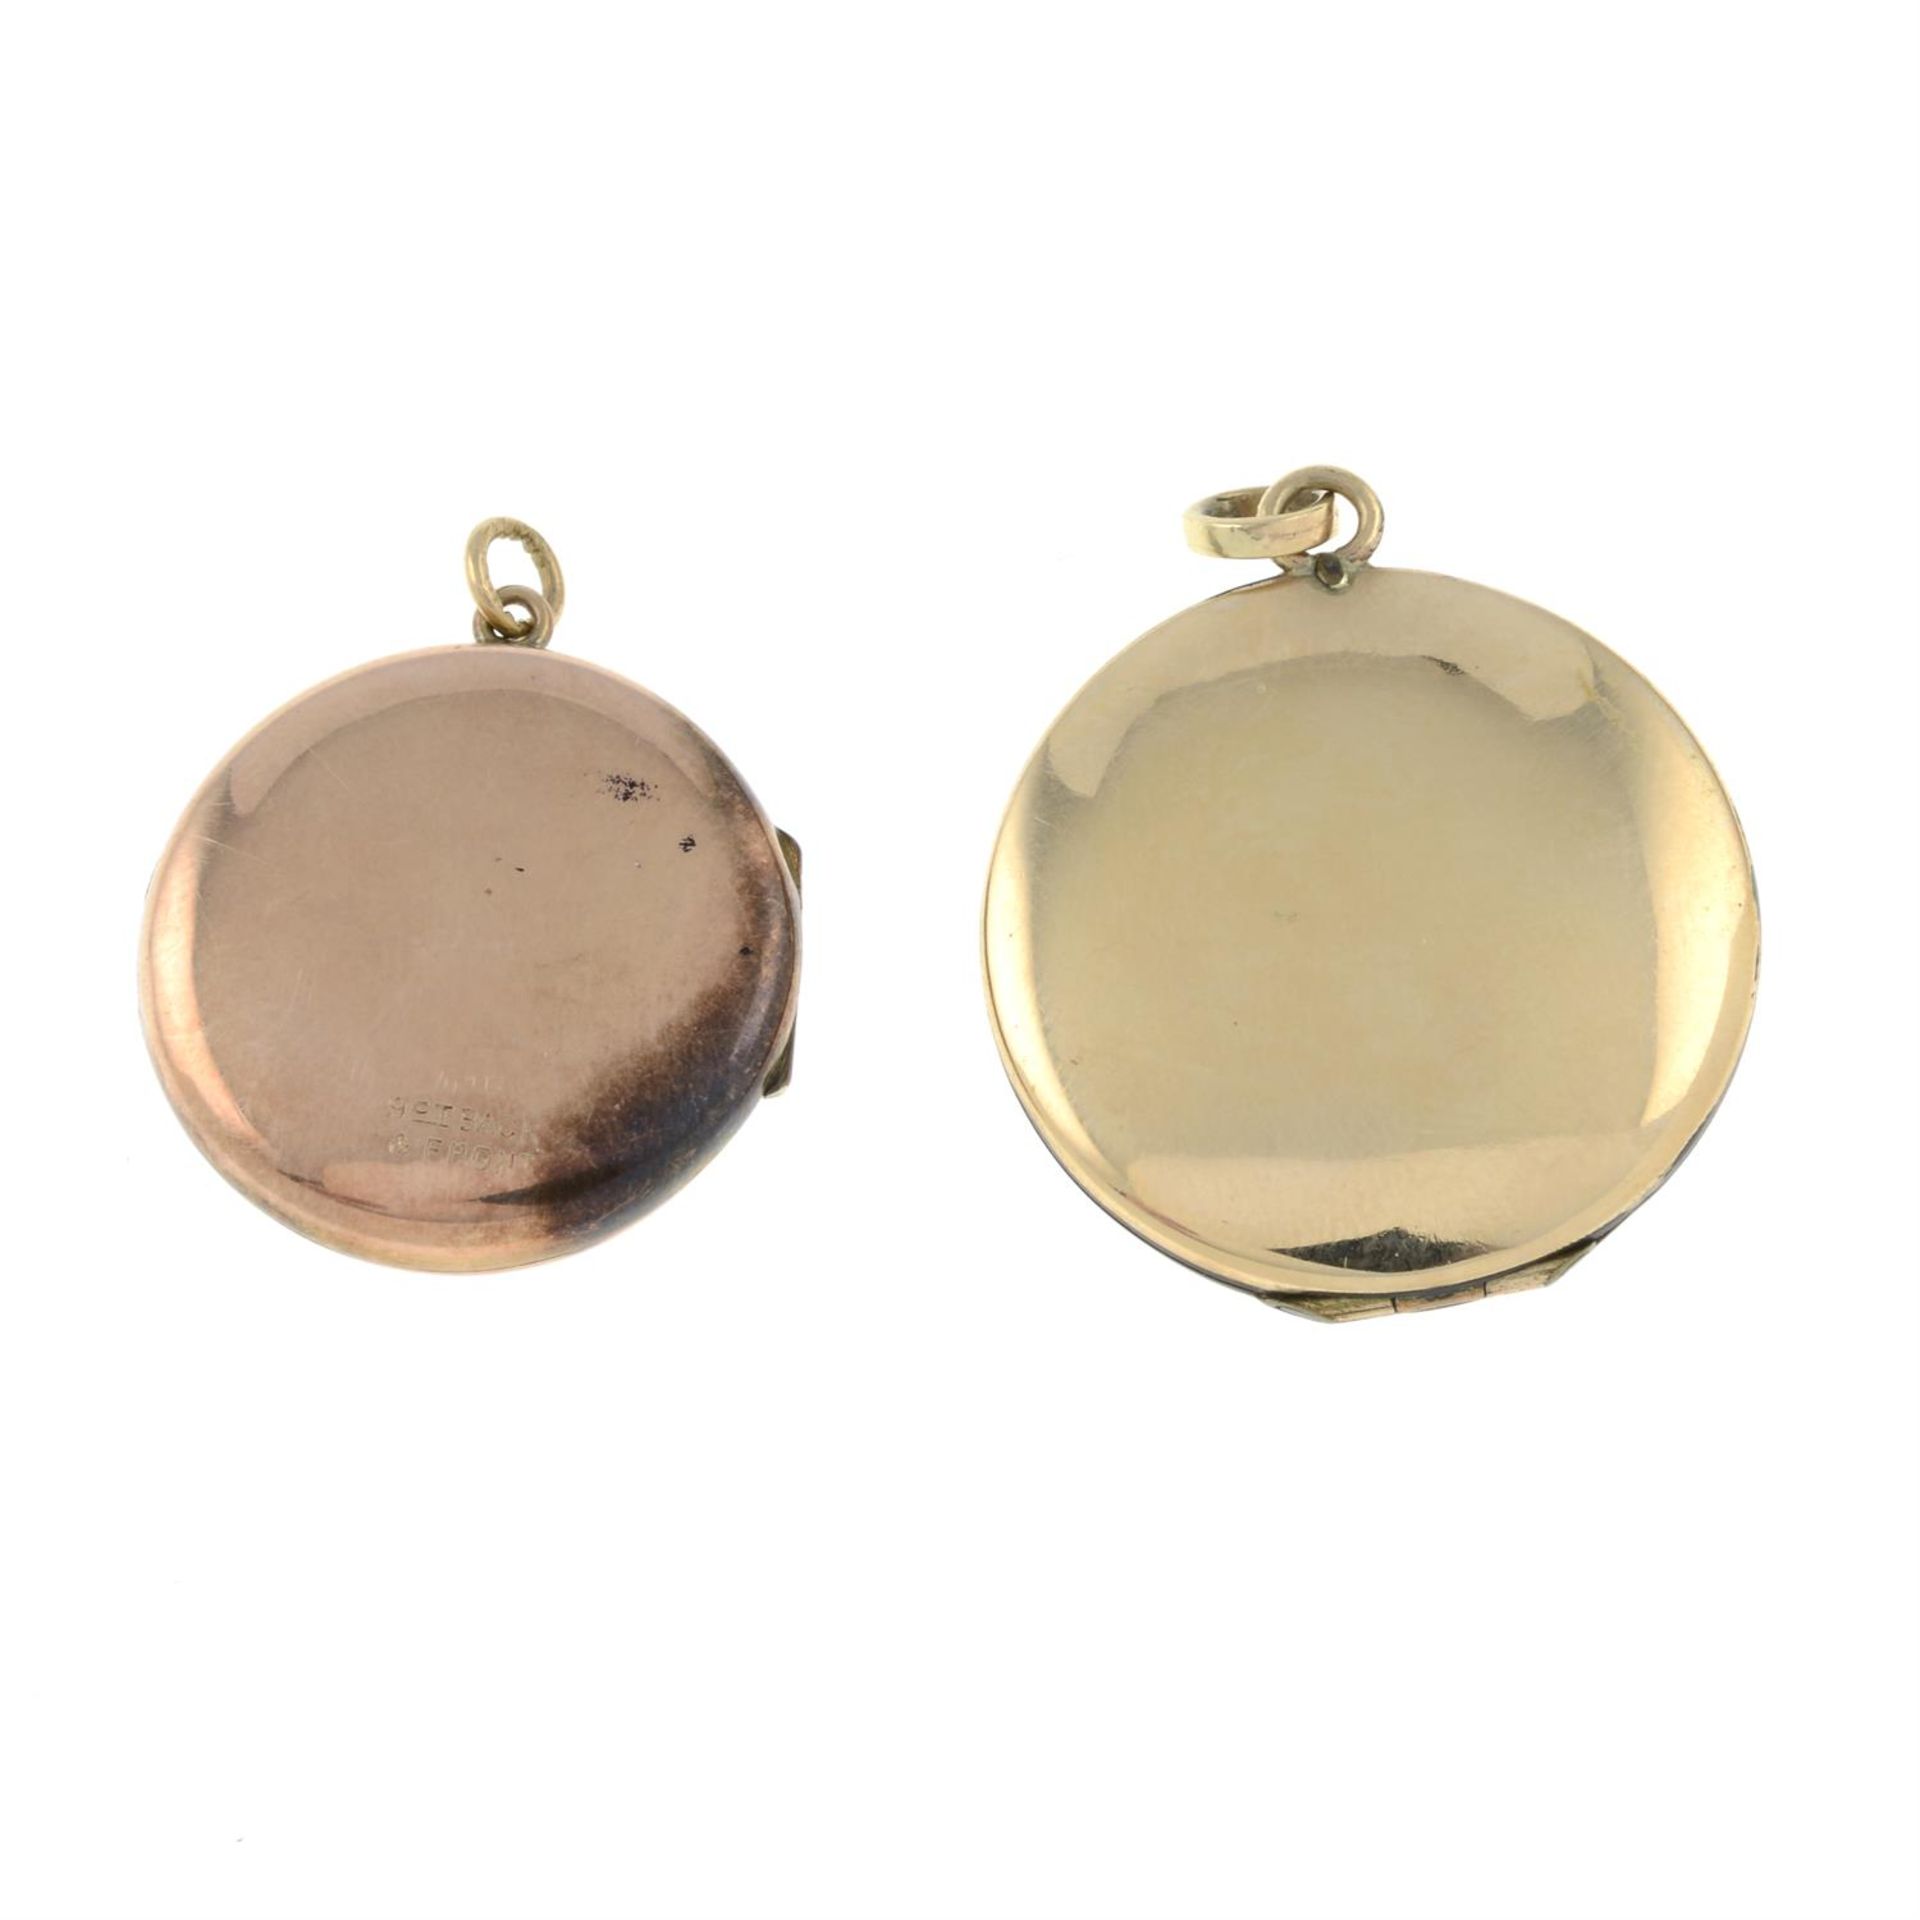 Two early 20th century lockets. - Image 2 of 2